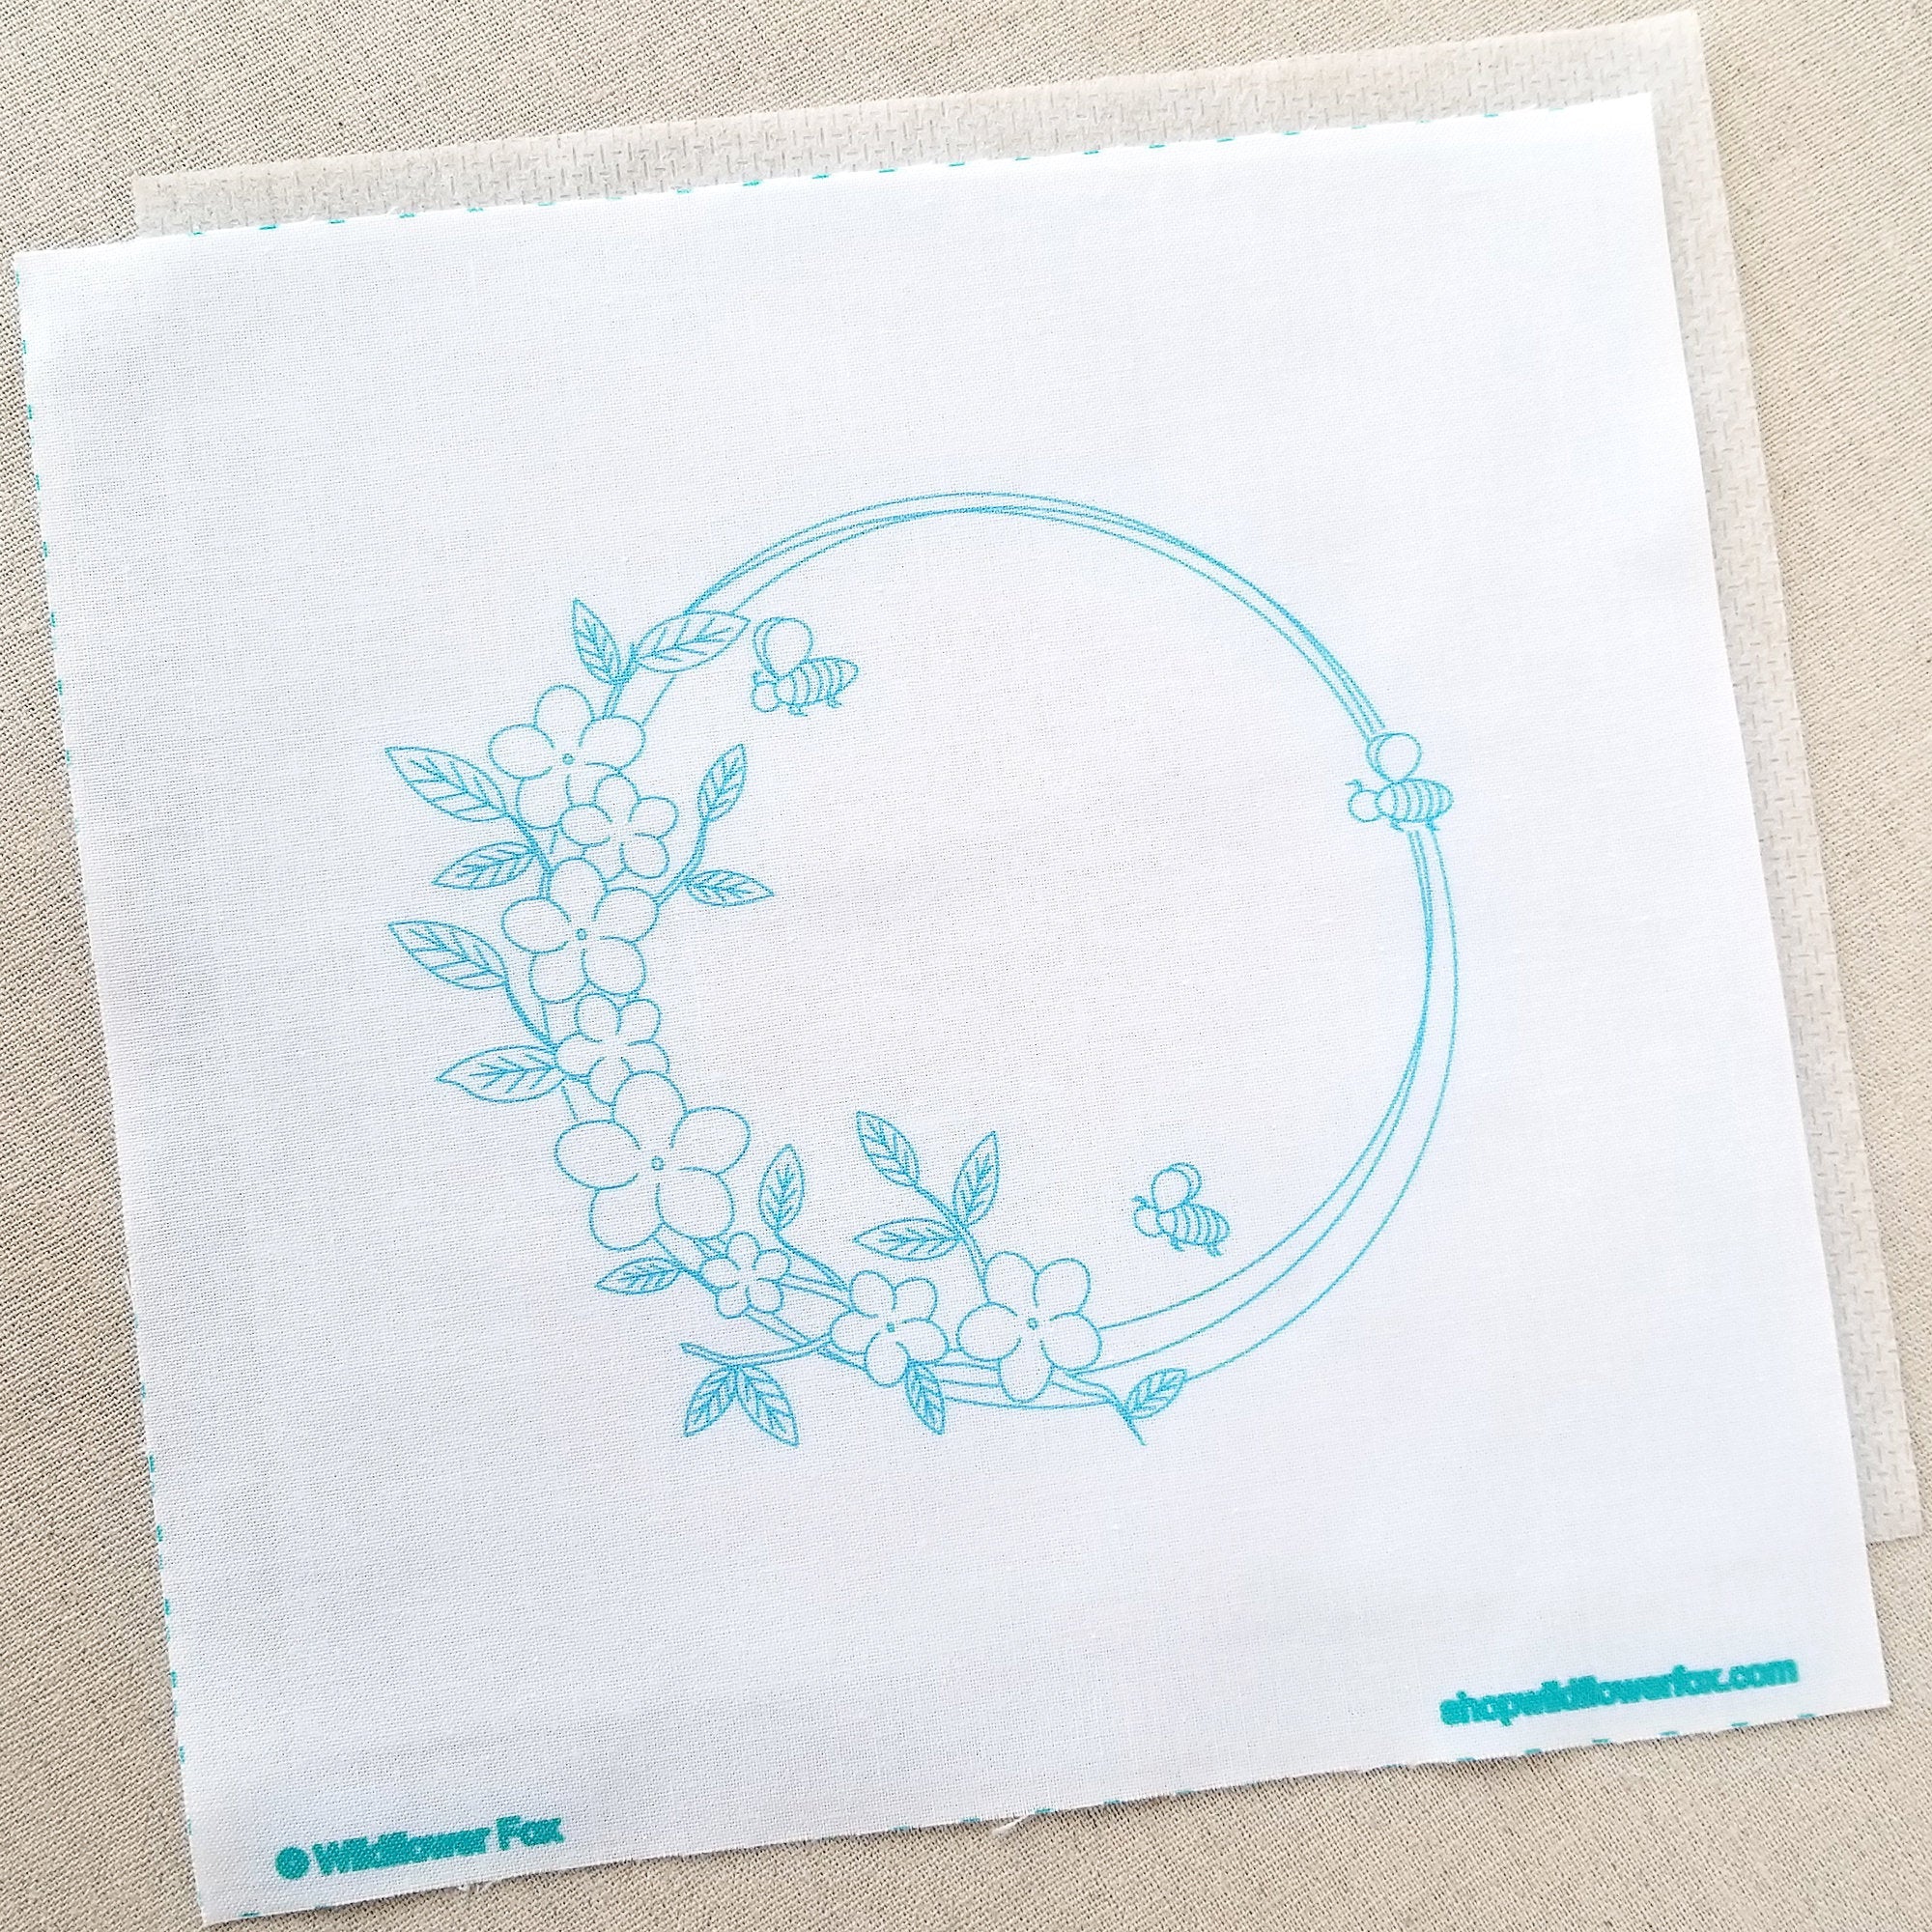 Printed Fabric Pattern - Apple Blossoms and Honey Bees Printed Fabric Hand Embroidery Pattern